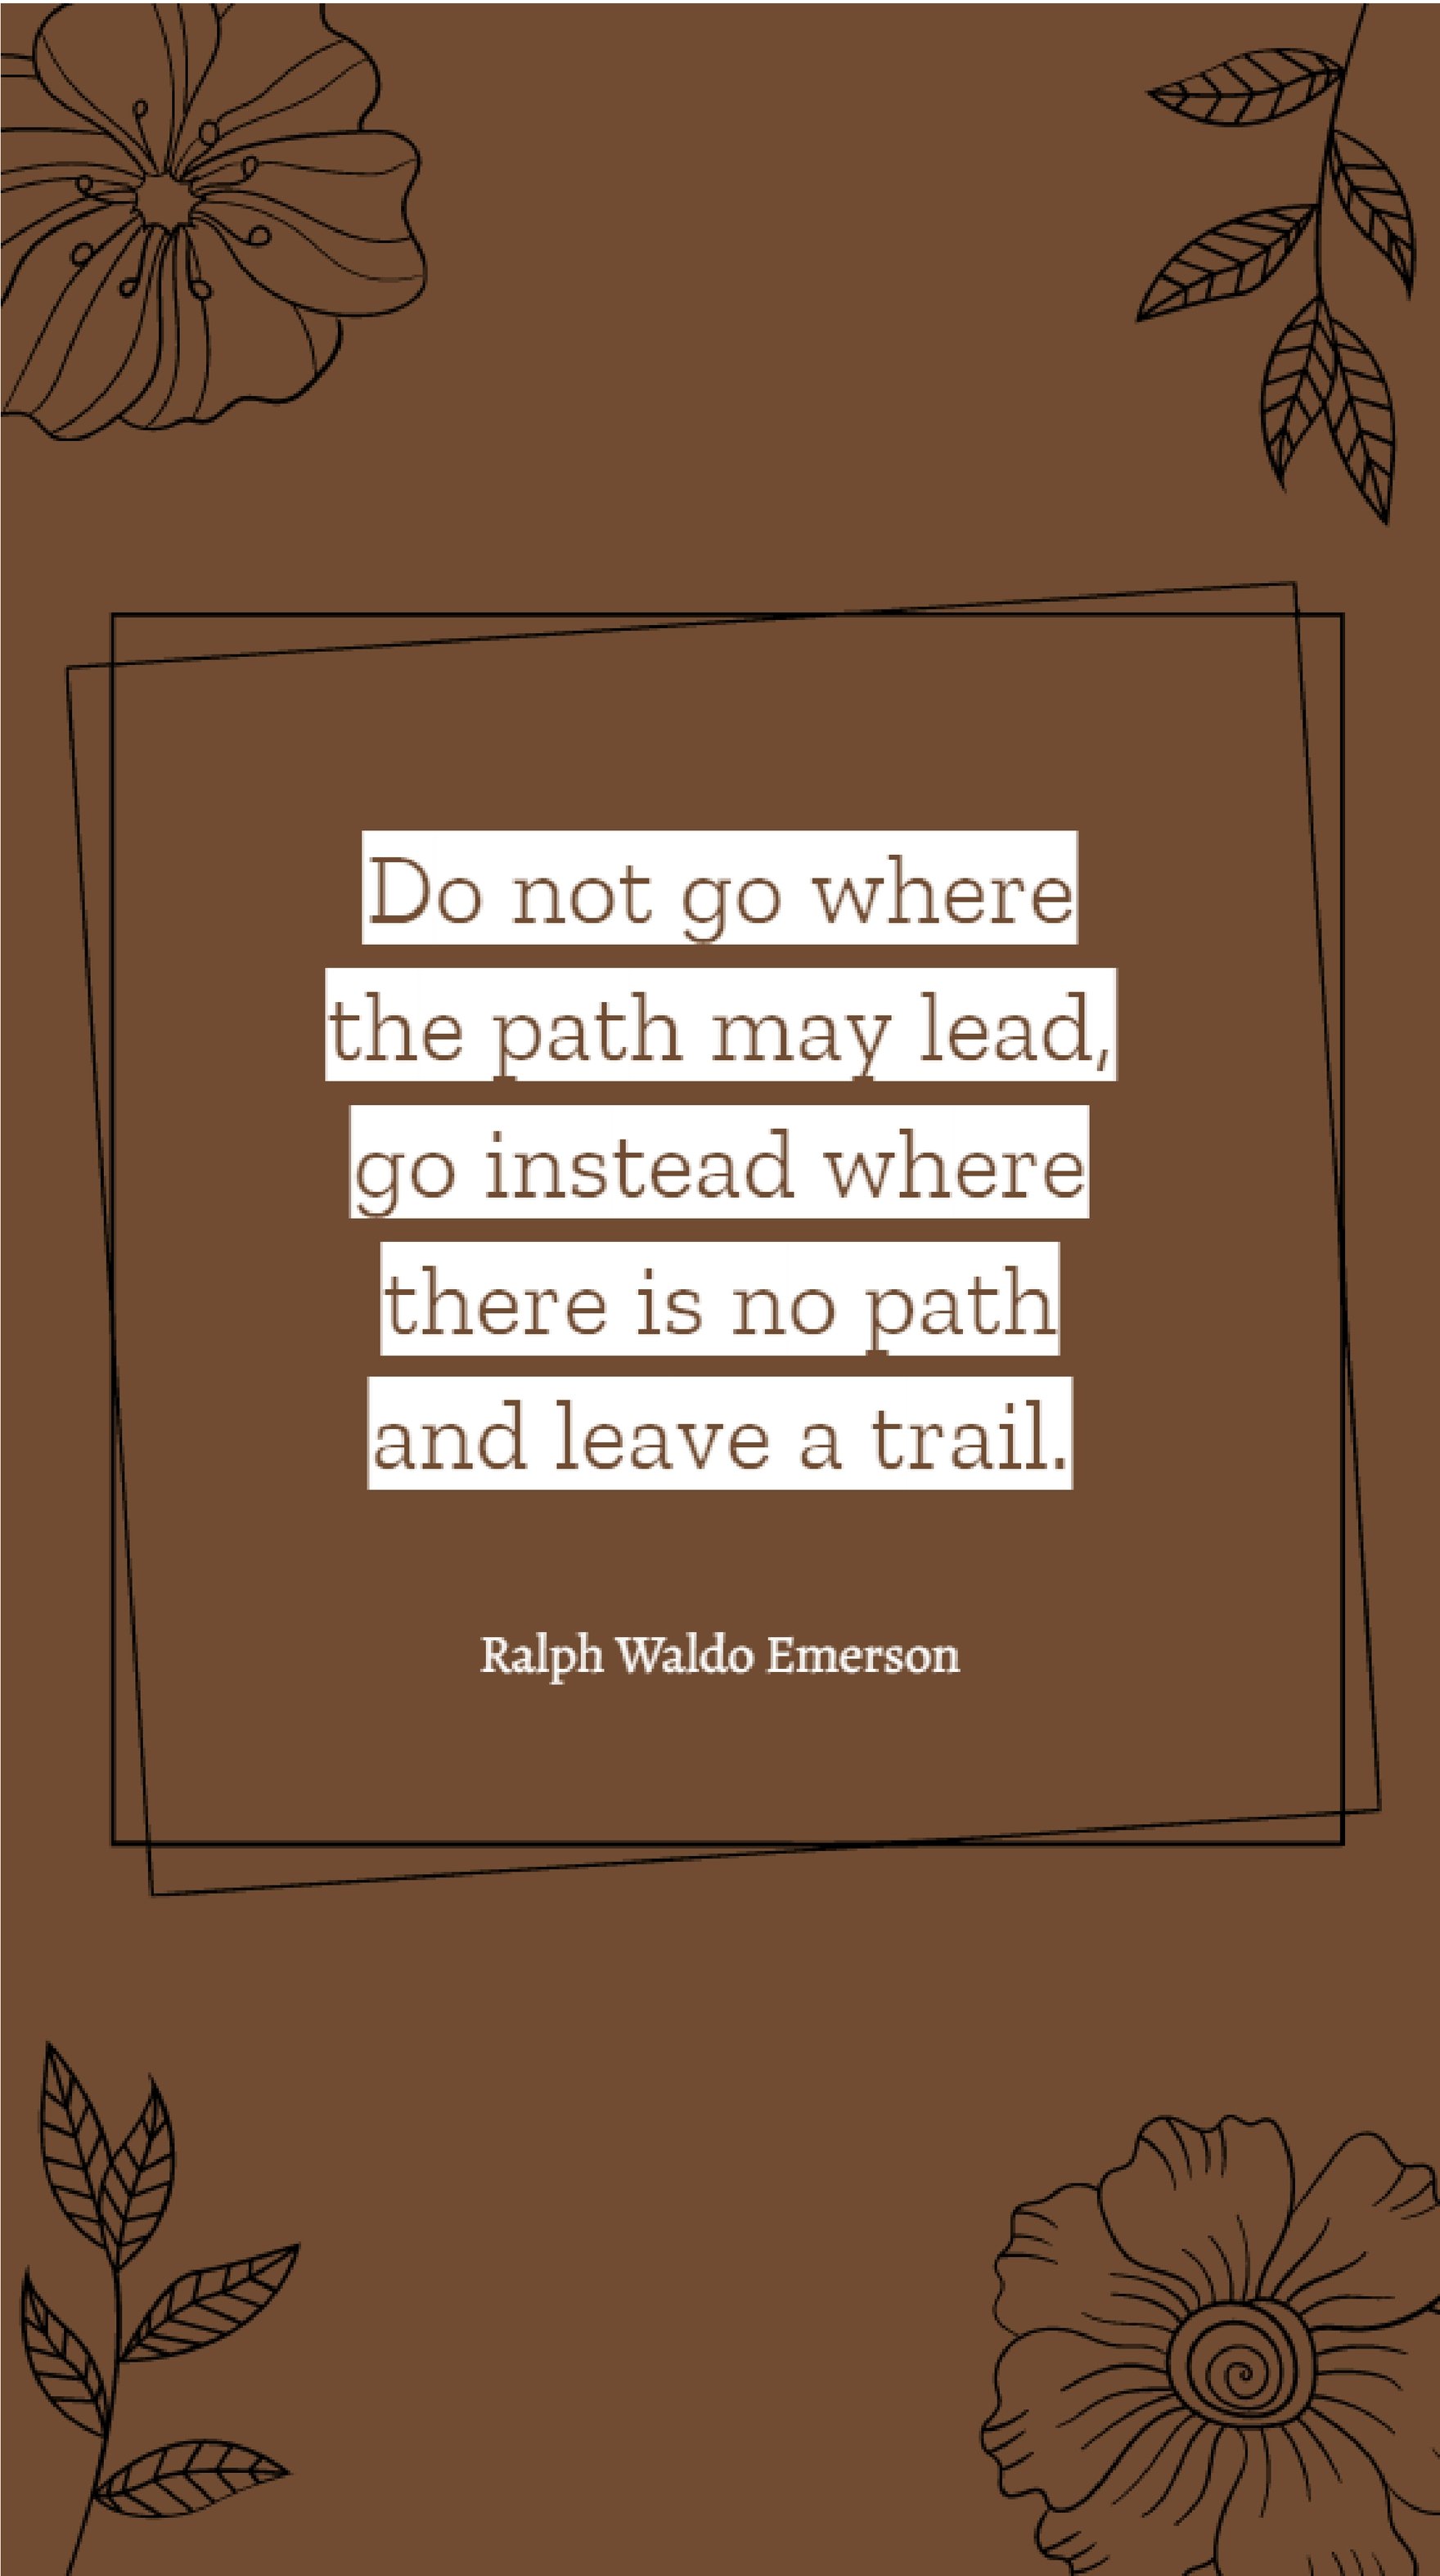 Ralph Waldo Emerson - Do not go where the path may lead, go instead where there is no path and leave a trail